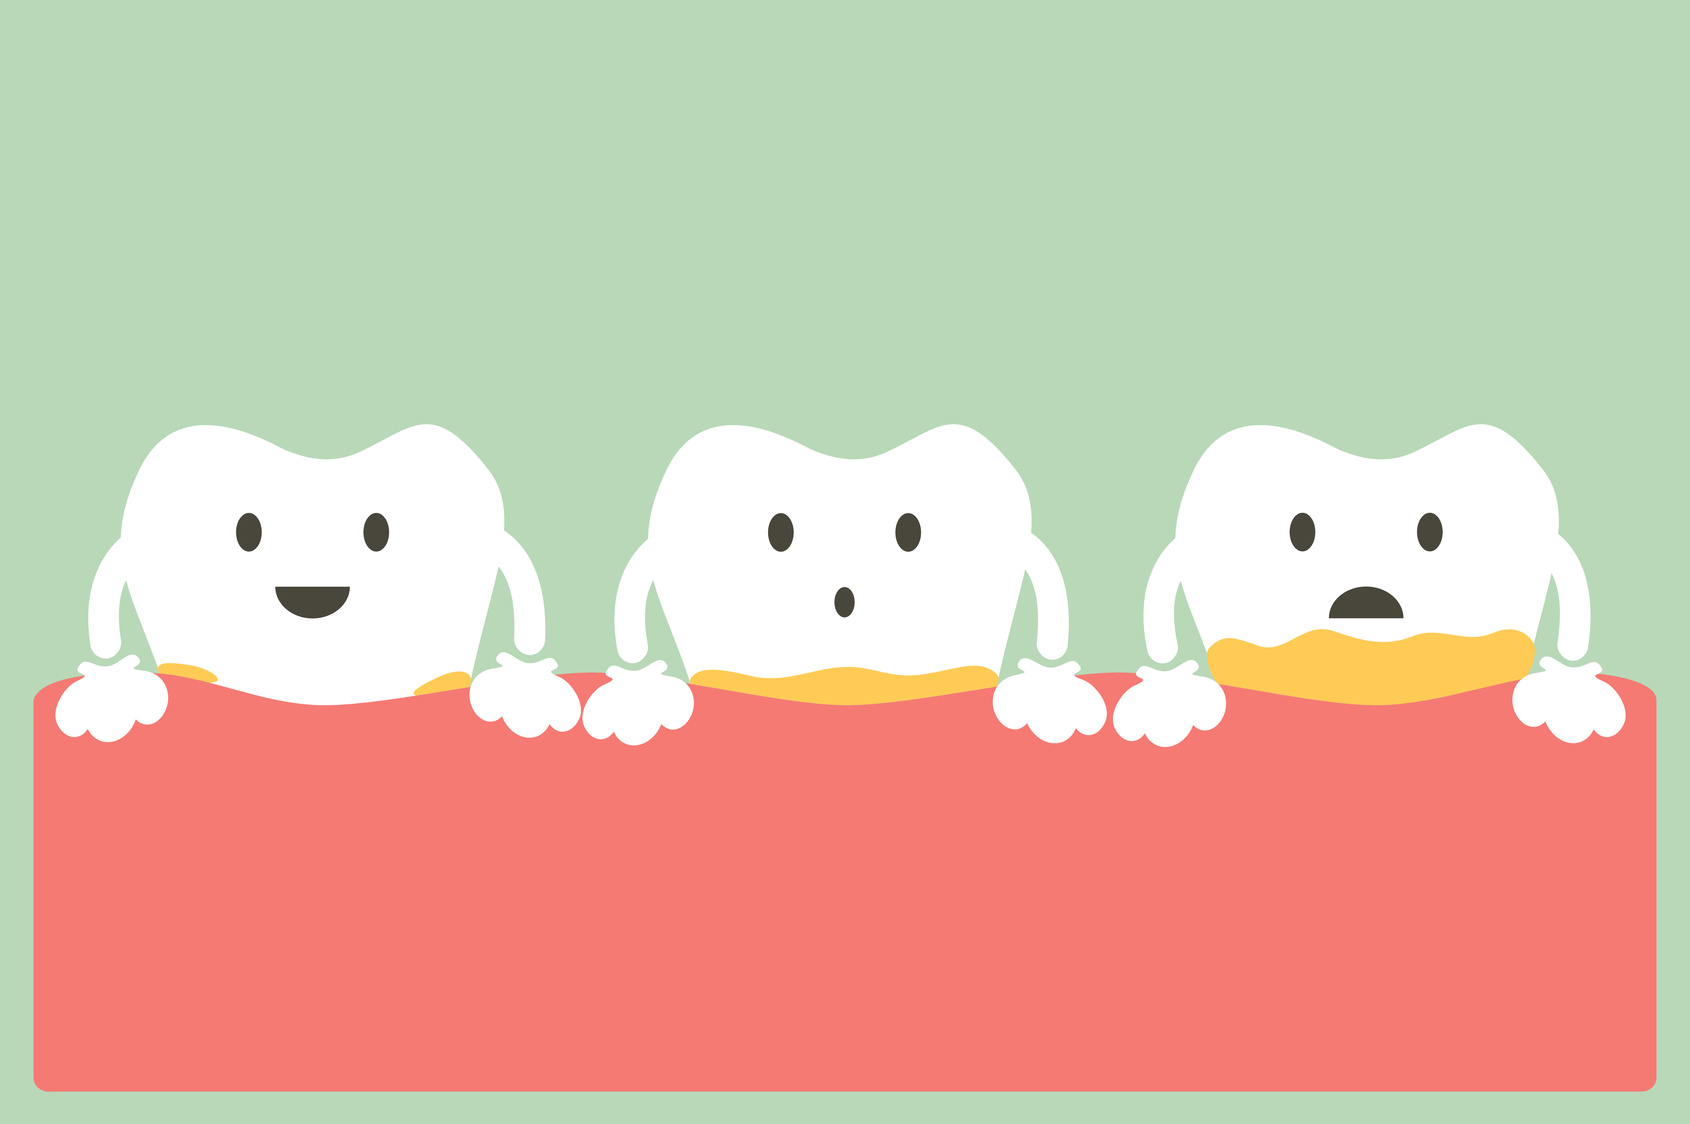 What You Should Know About Periodontal Disease Stages